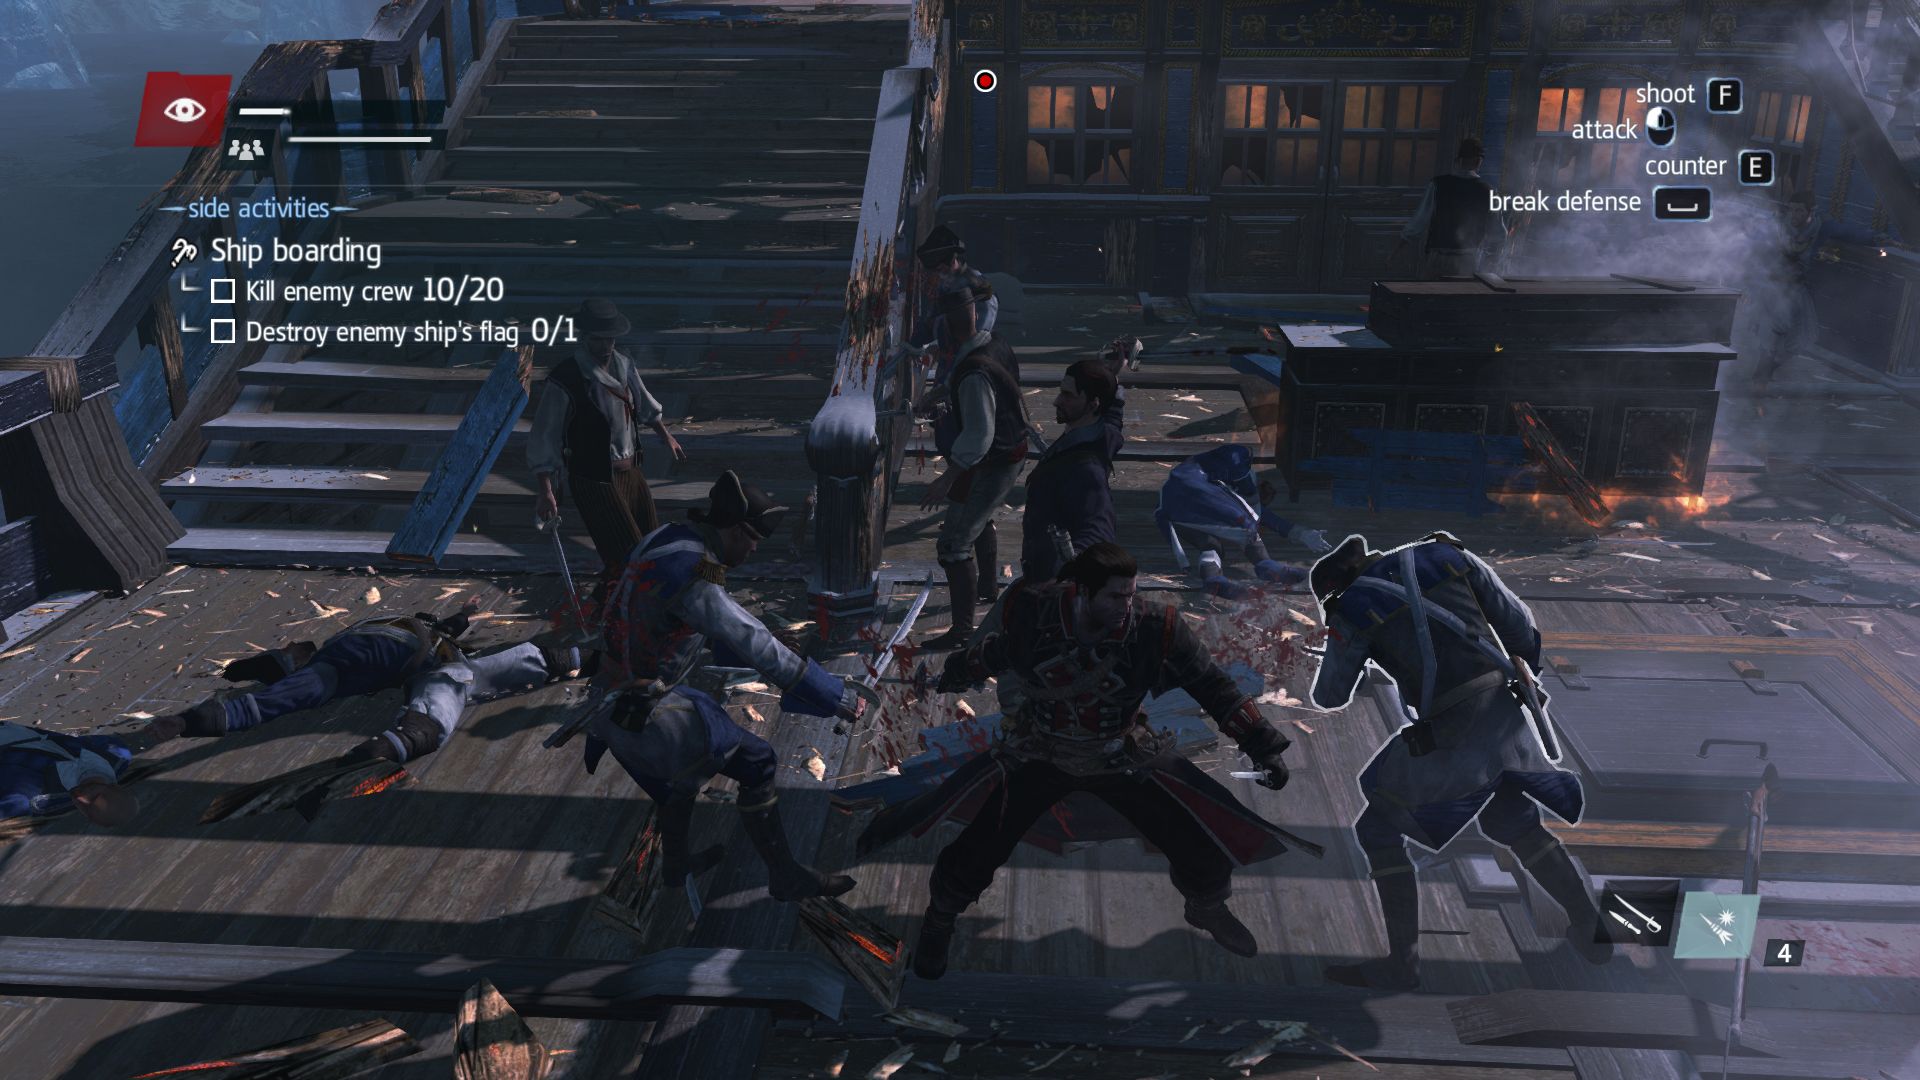 Assassin's Creed: Rogue review – a disappointing mix-tape of previous games, Assassin's Creed